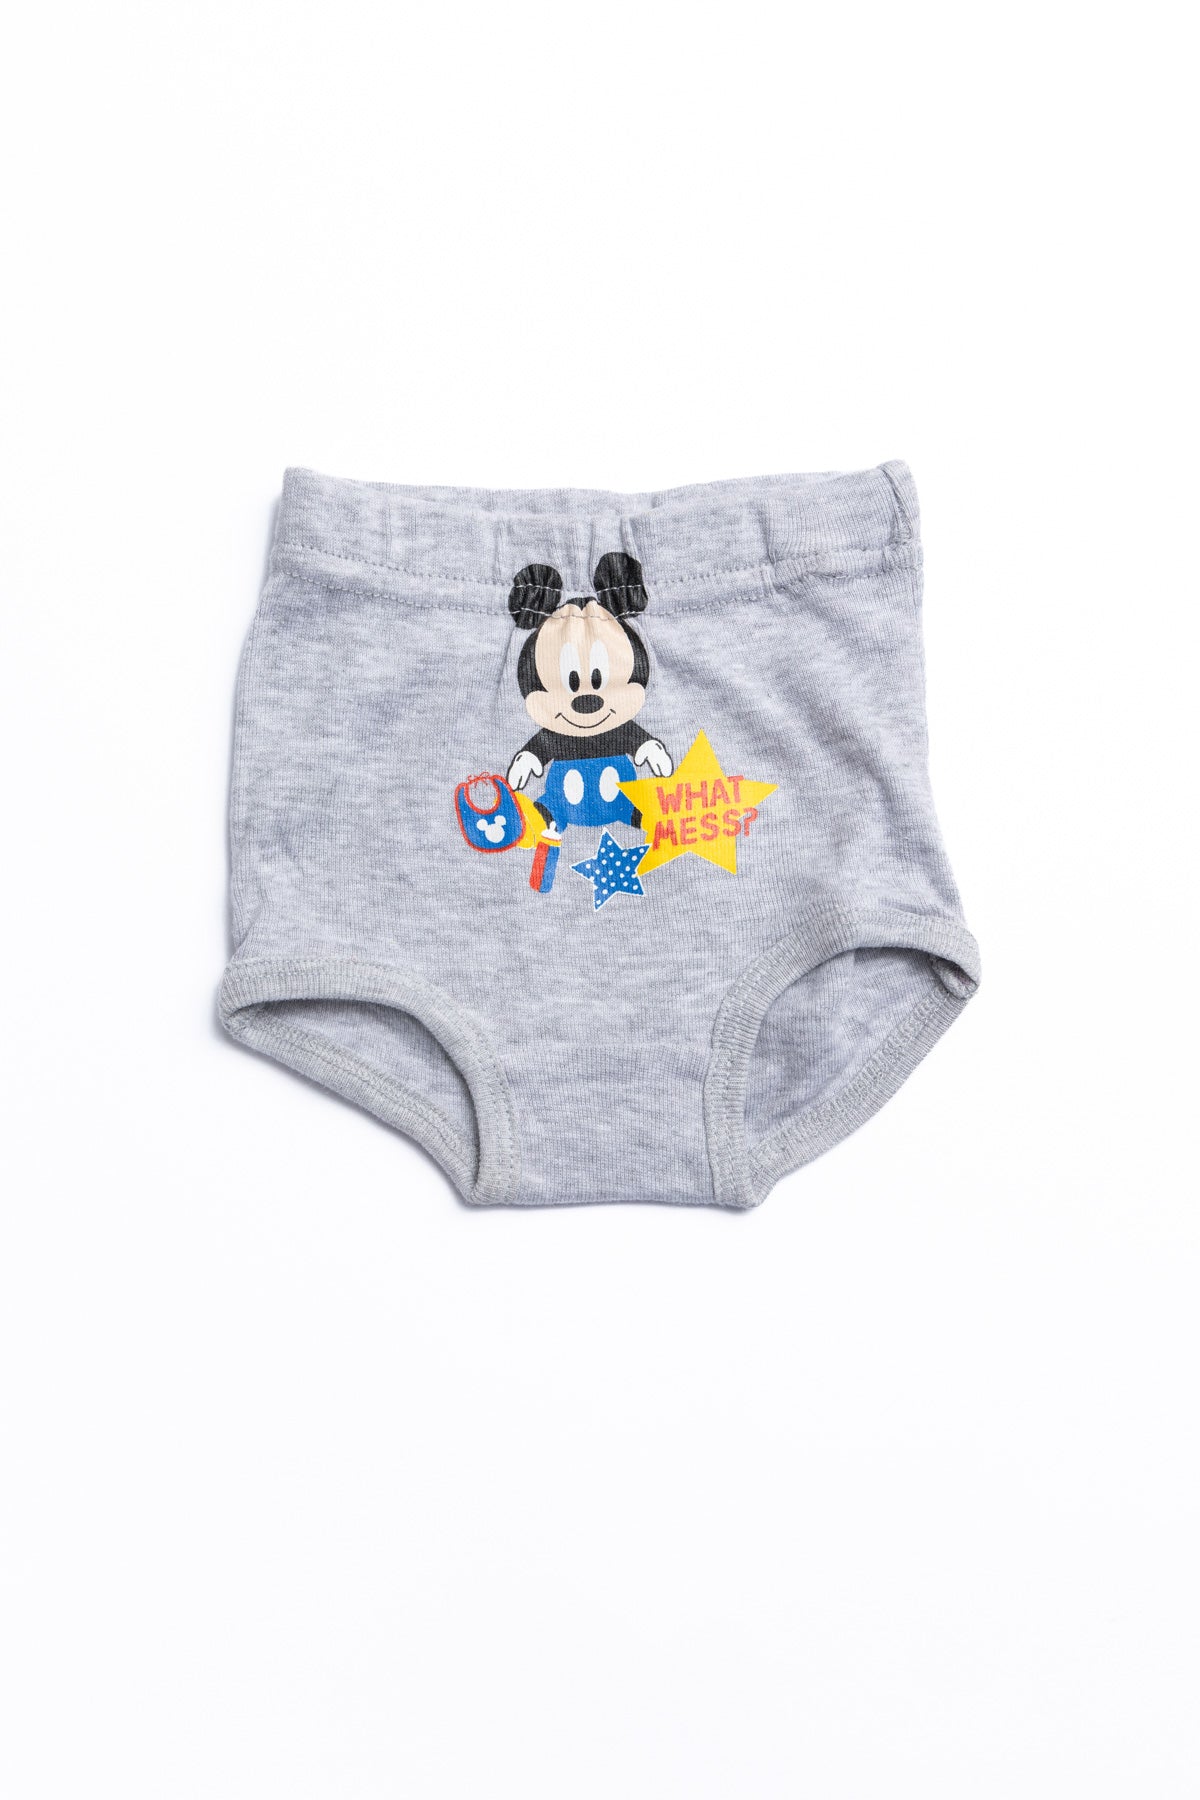 Panty Baby Mickey " What Mess " 4043